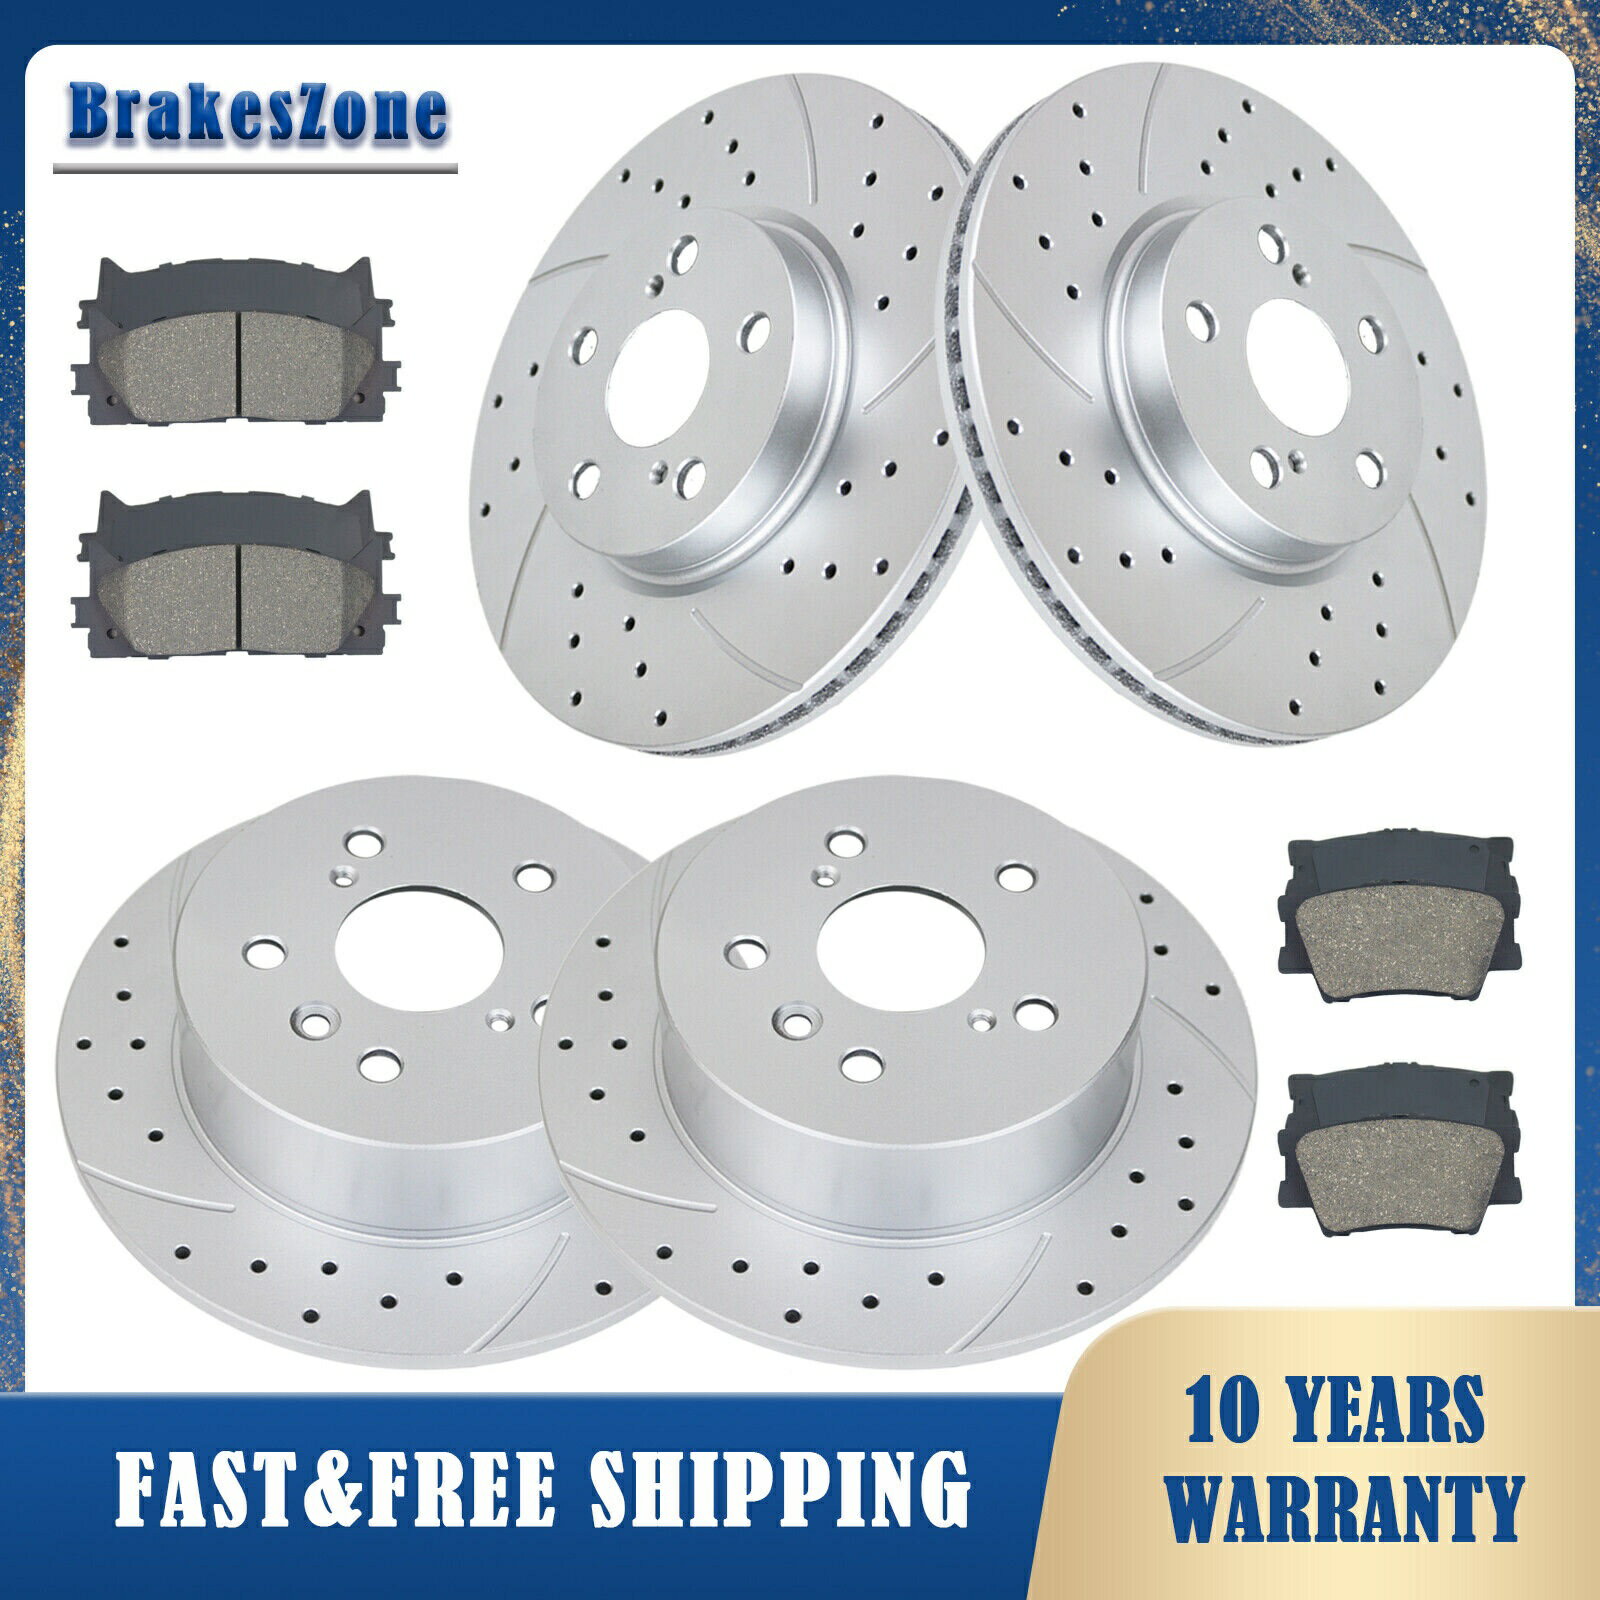 brake disc rotor トヨタカムリレクサスES300H 296mmフロントと281mmリアブレーキローターパッドに適合します Fit for Toyota Camry Lexus ES300H 296mm Front and 281mm Rear Brake Rotors Pads